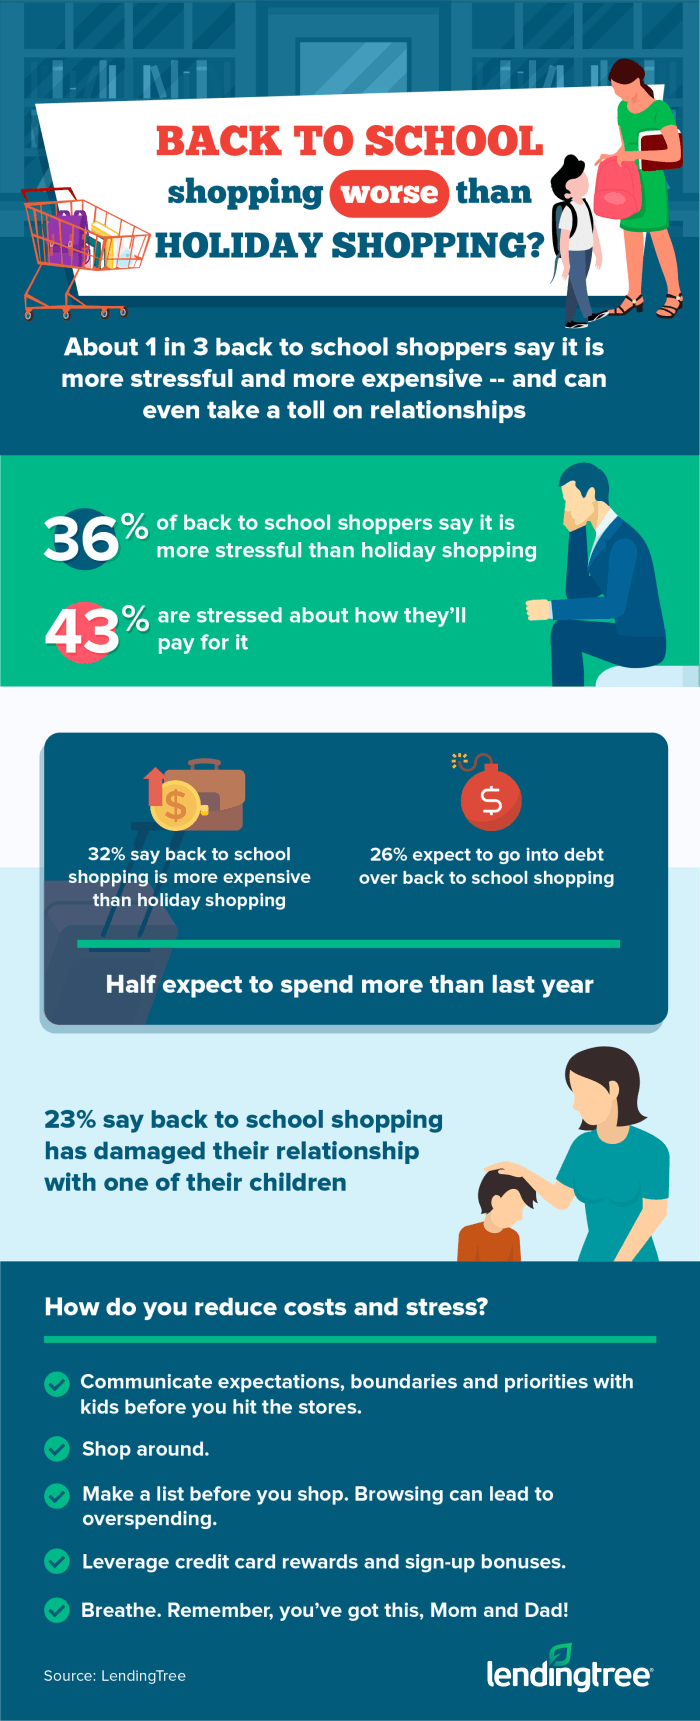 Is Back to School Shopping Worse Than Holiday Shopping?